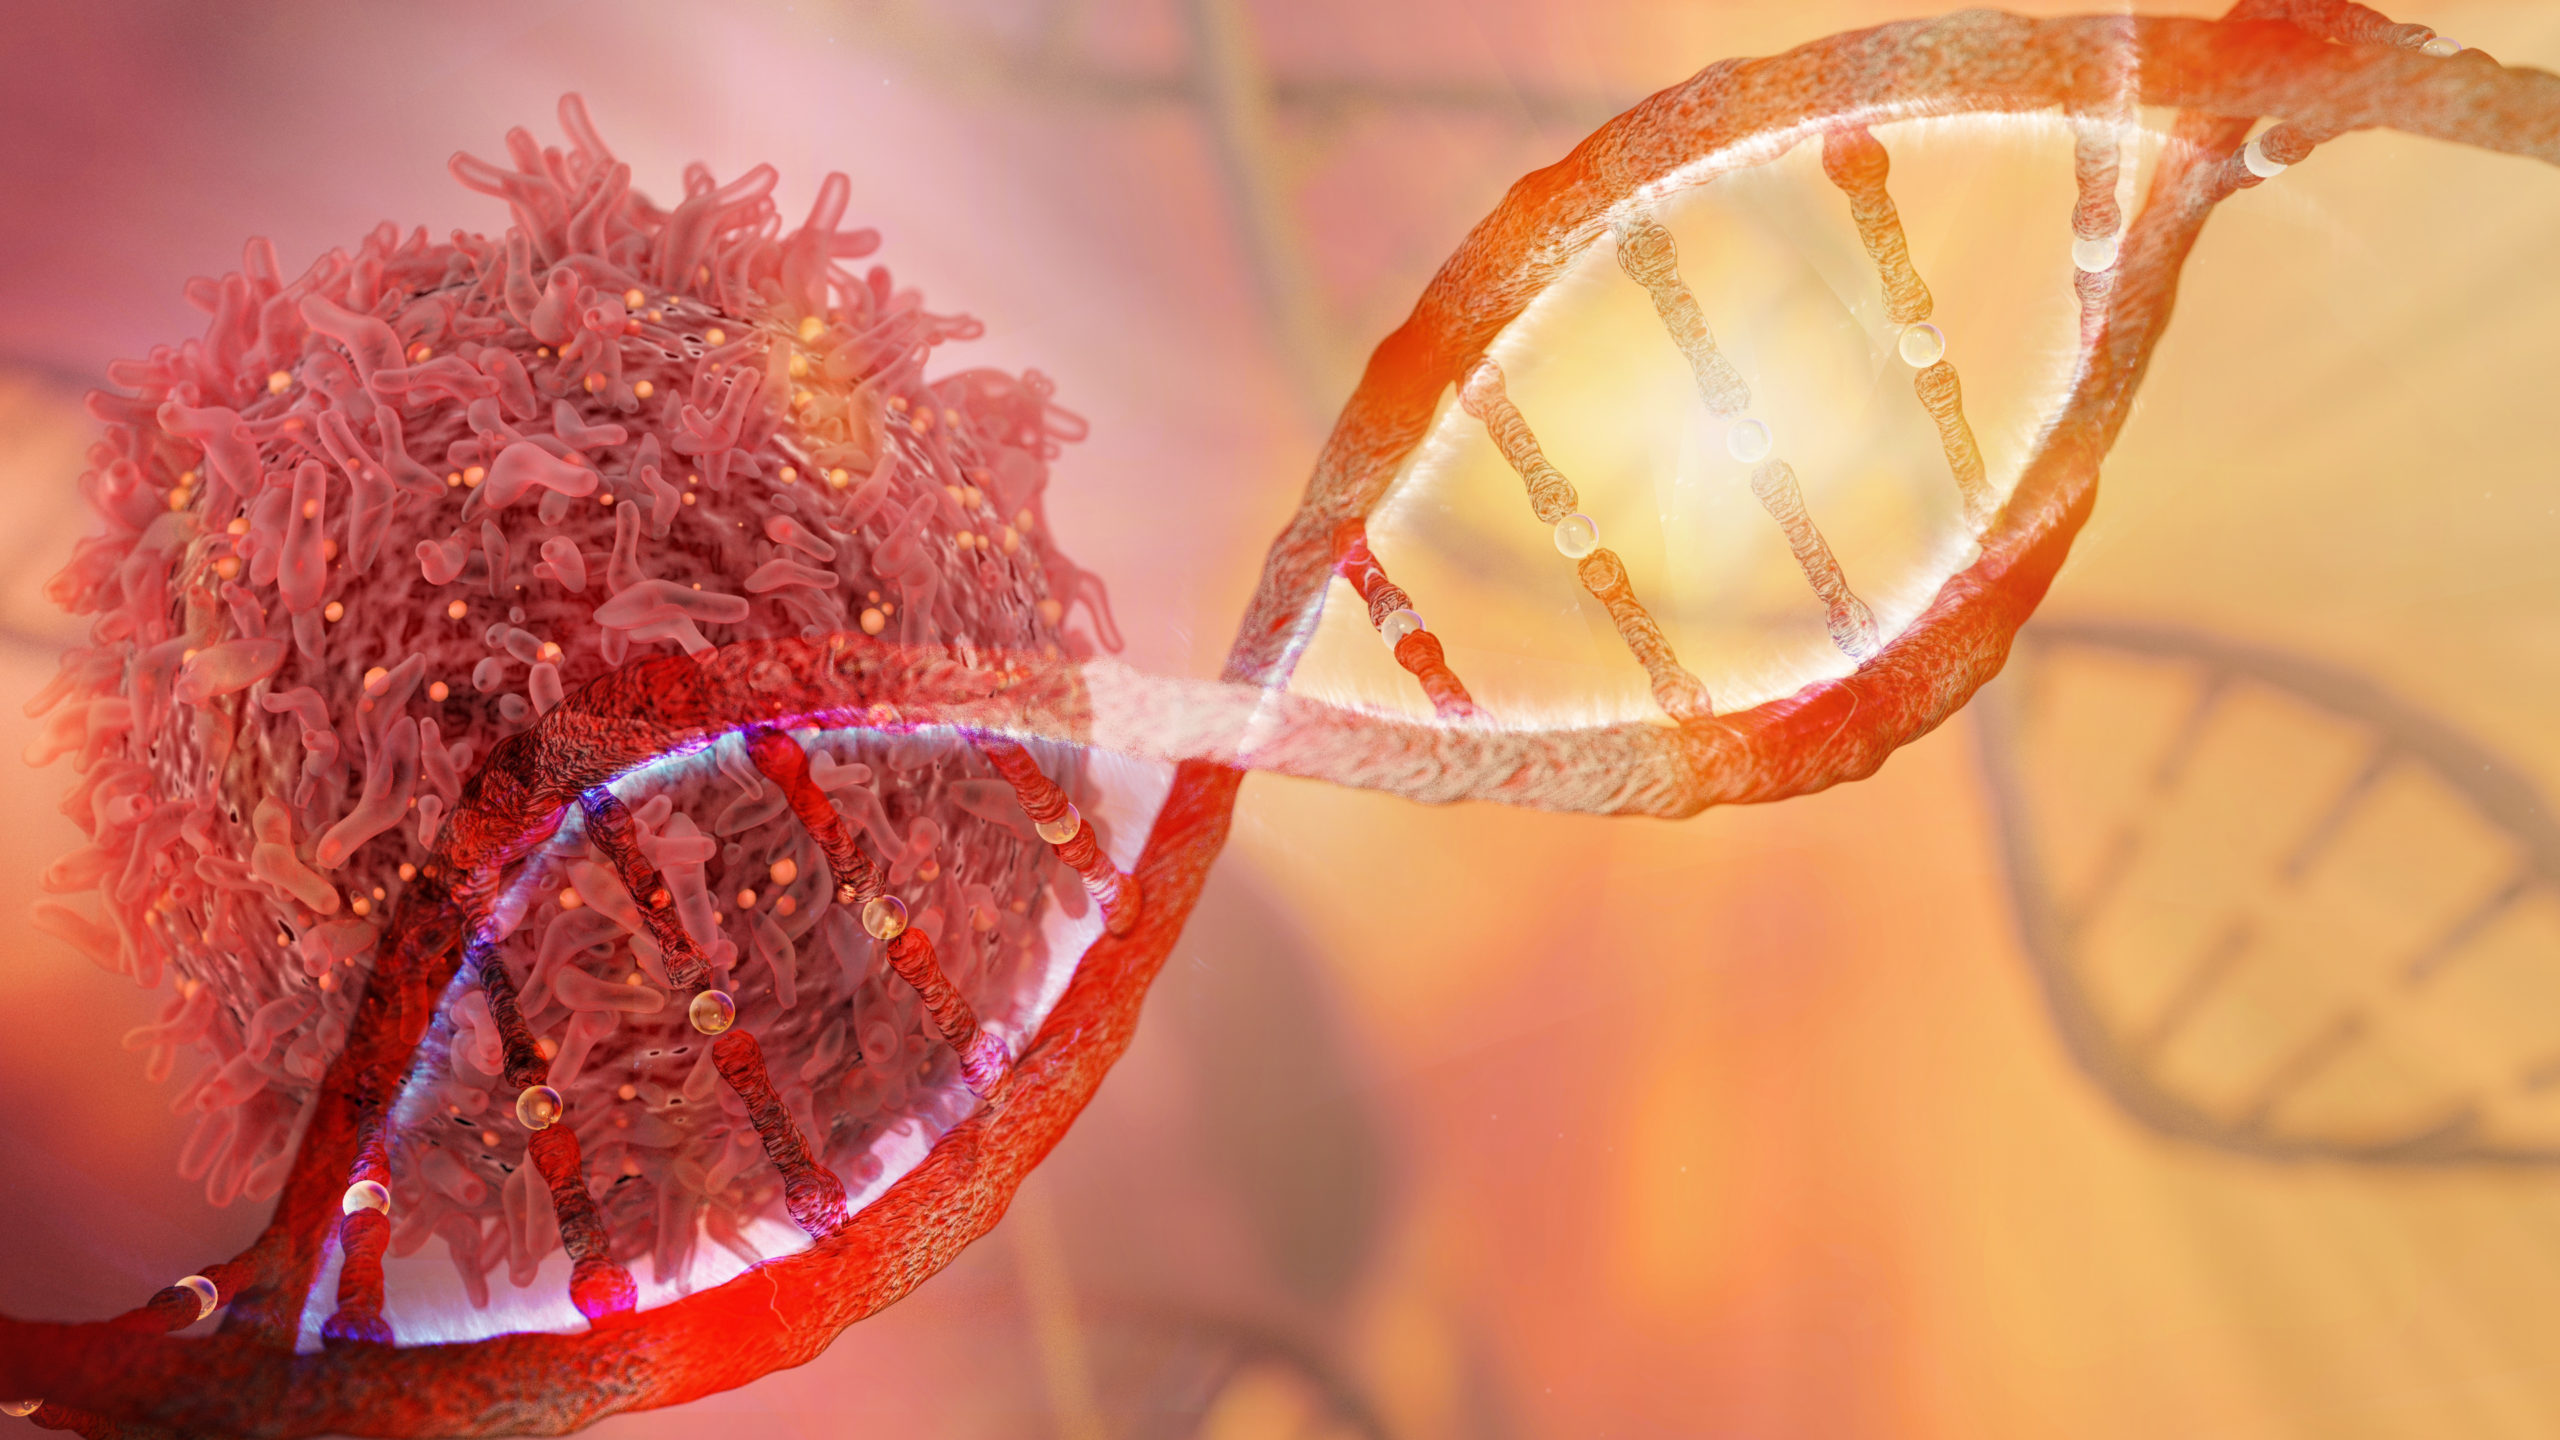 Potential Biomarker Discovered For Diagnosing Early Stage Cancer